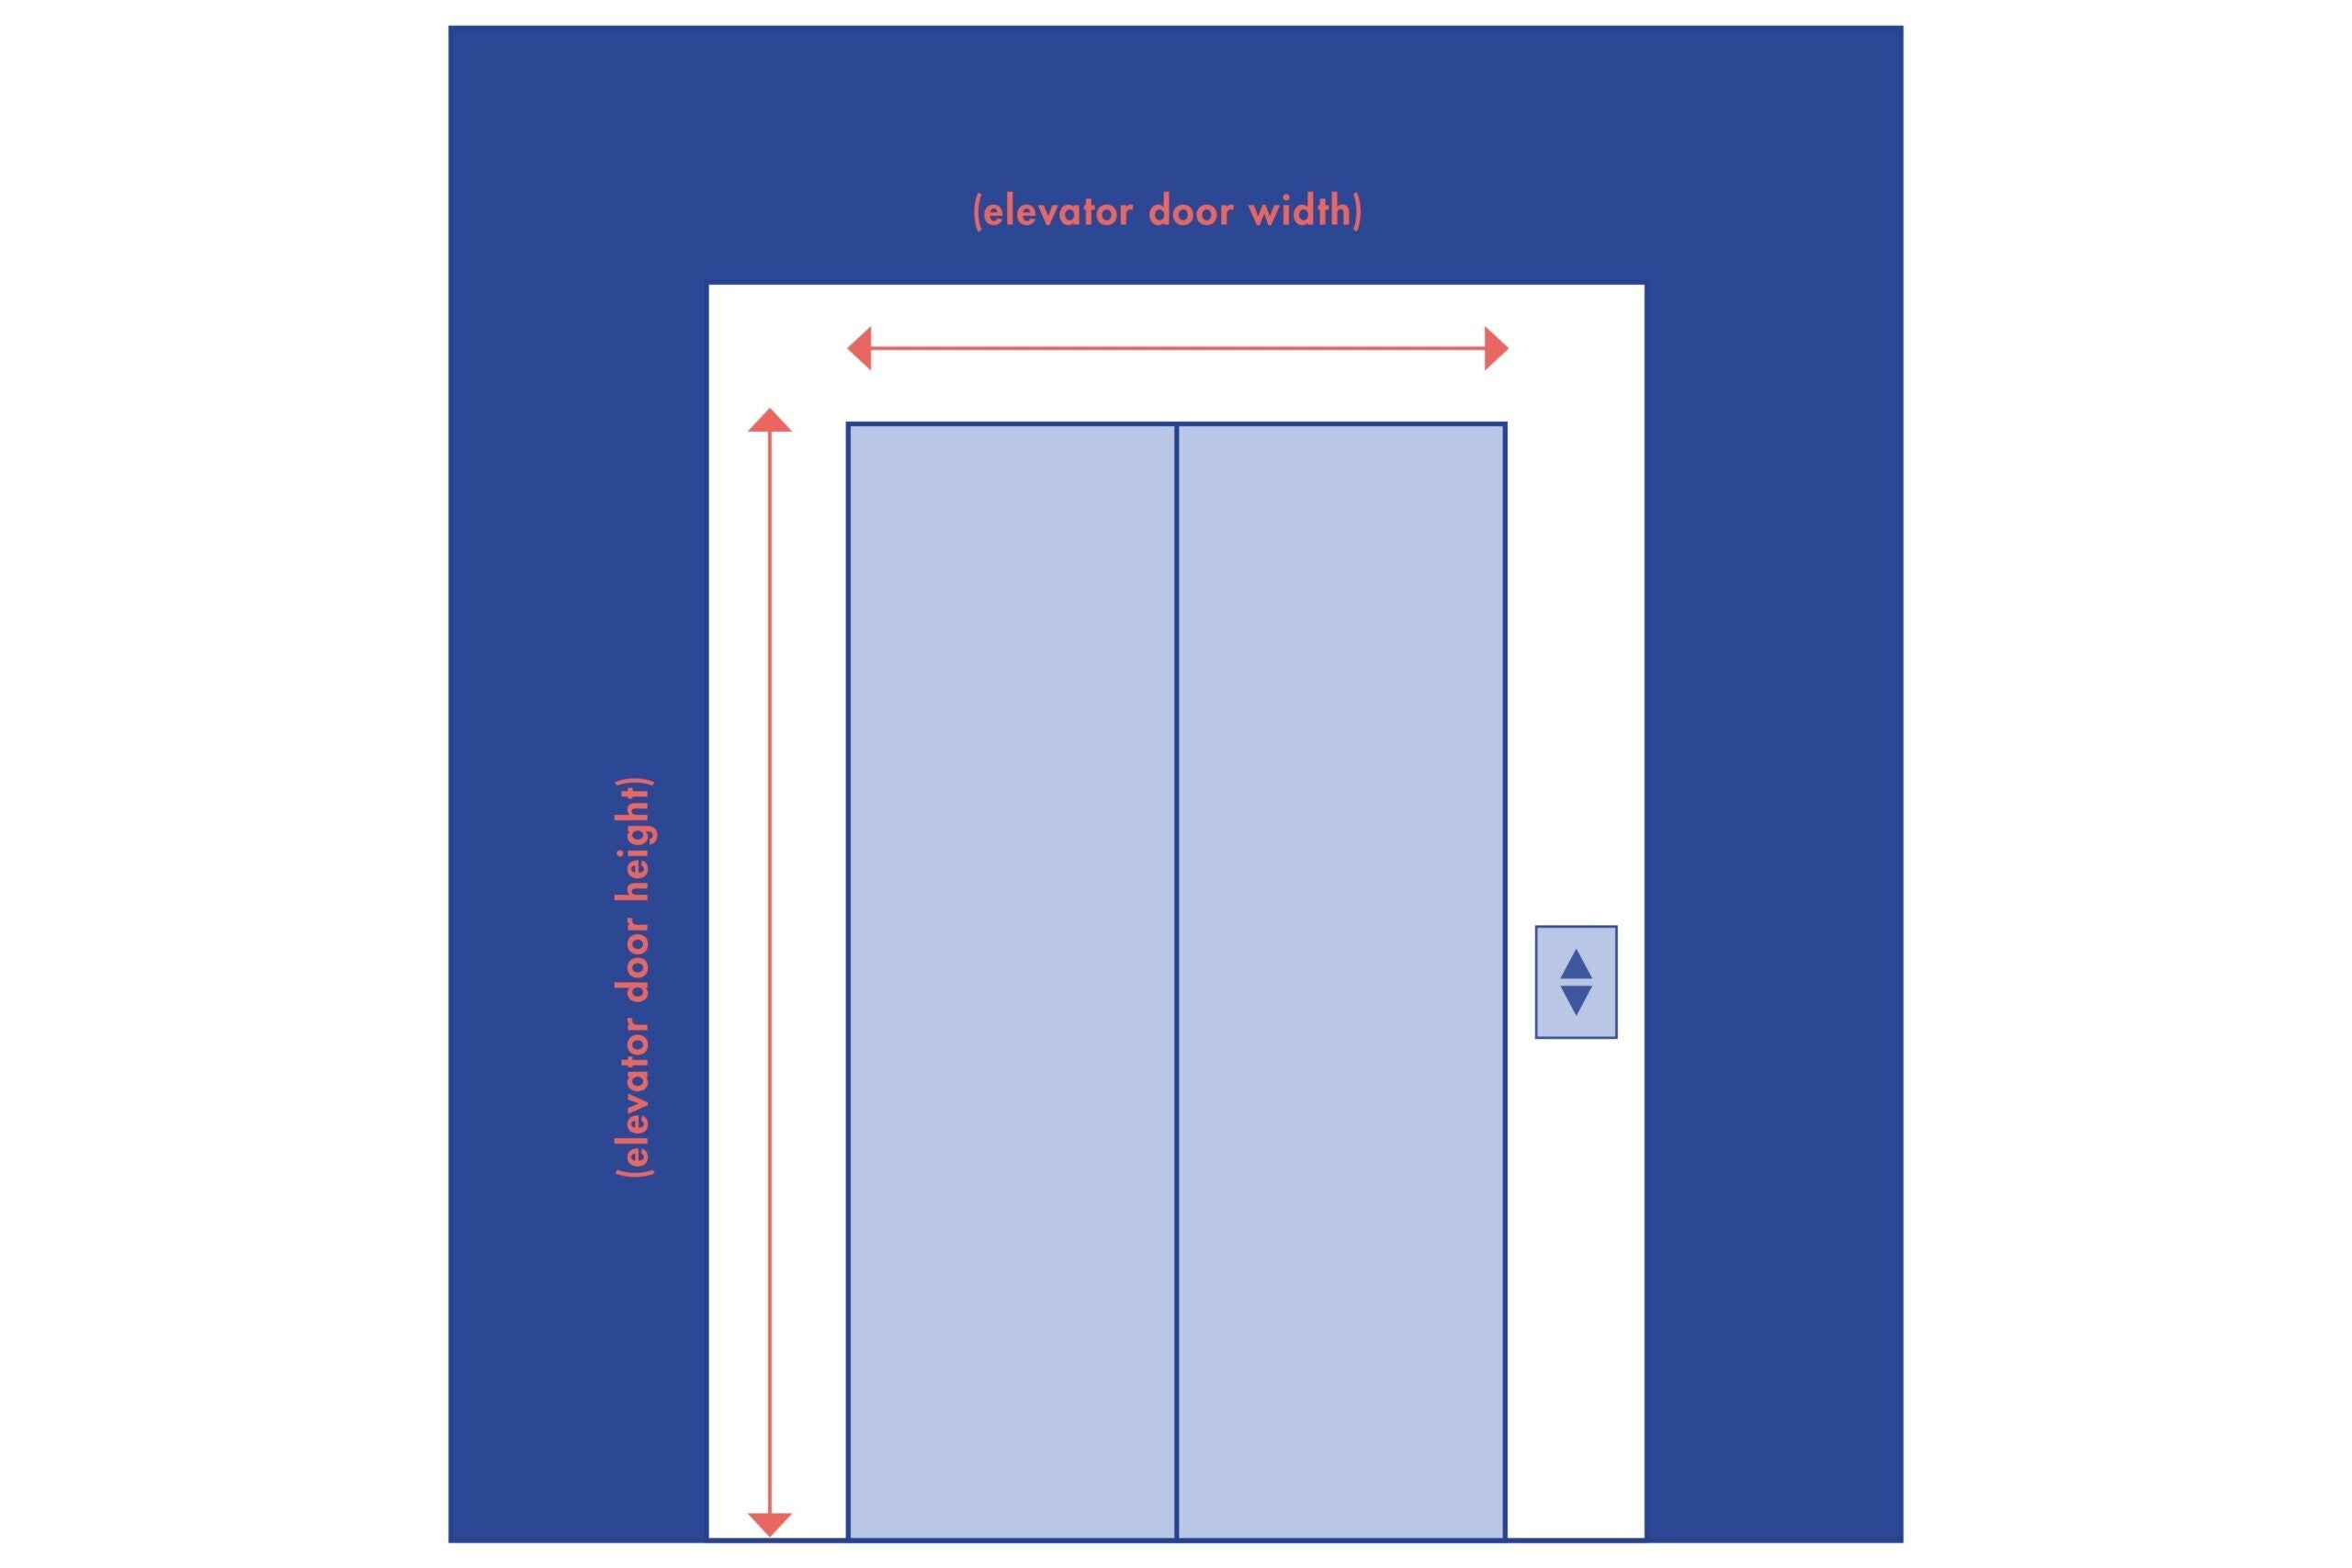 Diagram showing an elevator door with arrows indicating the width and height measurements. The labels 